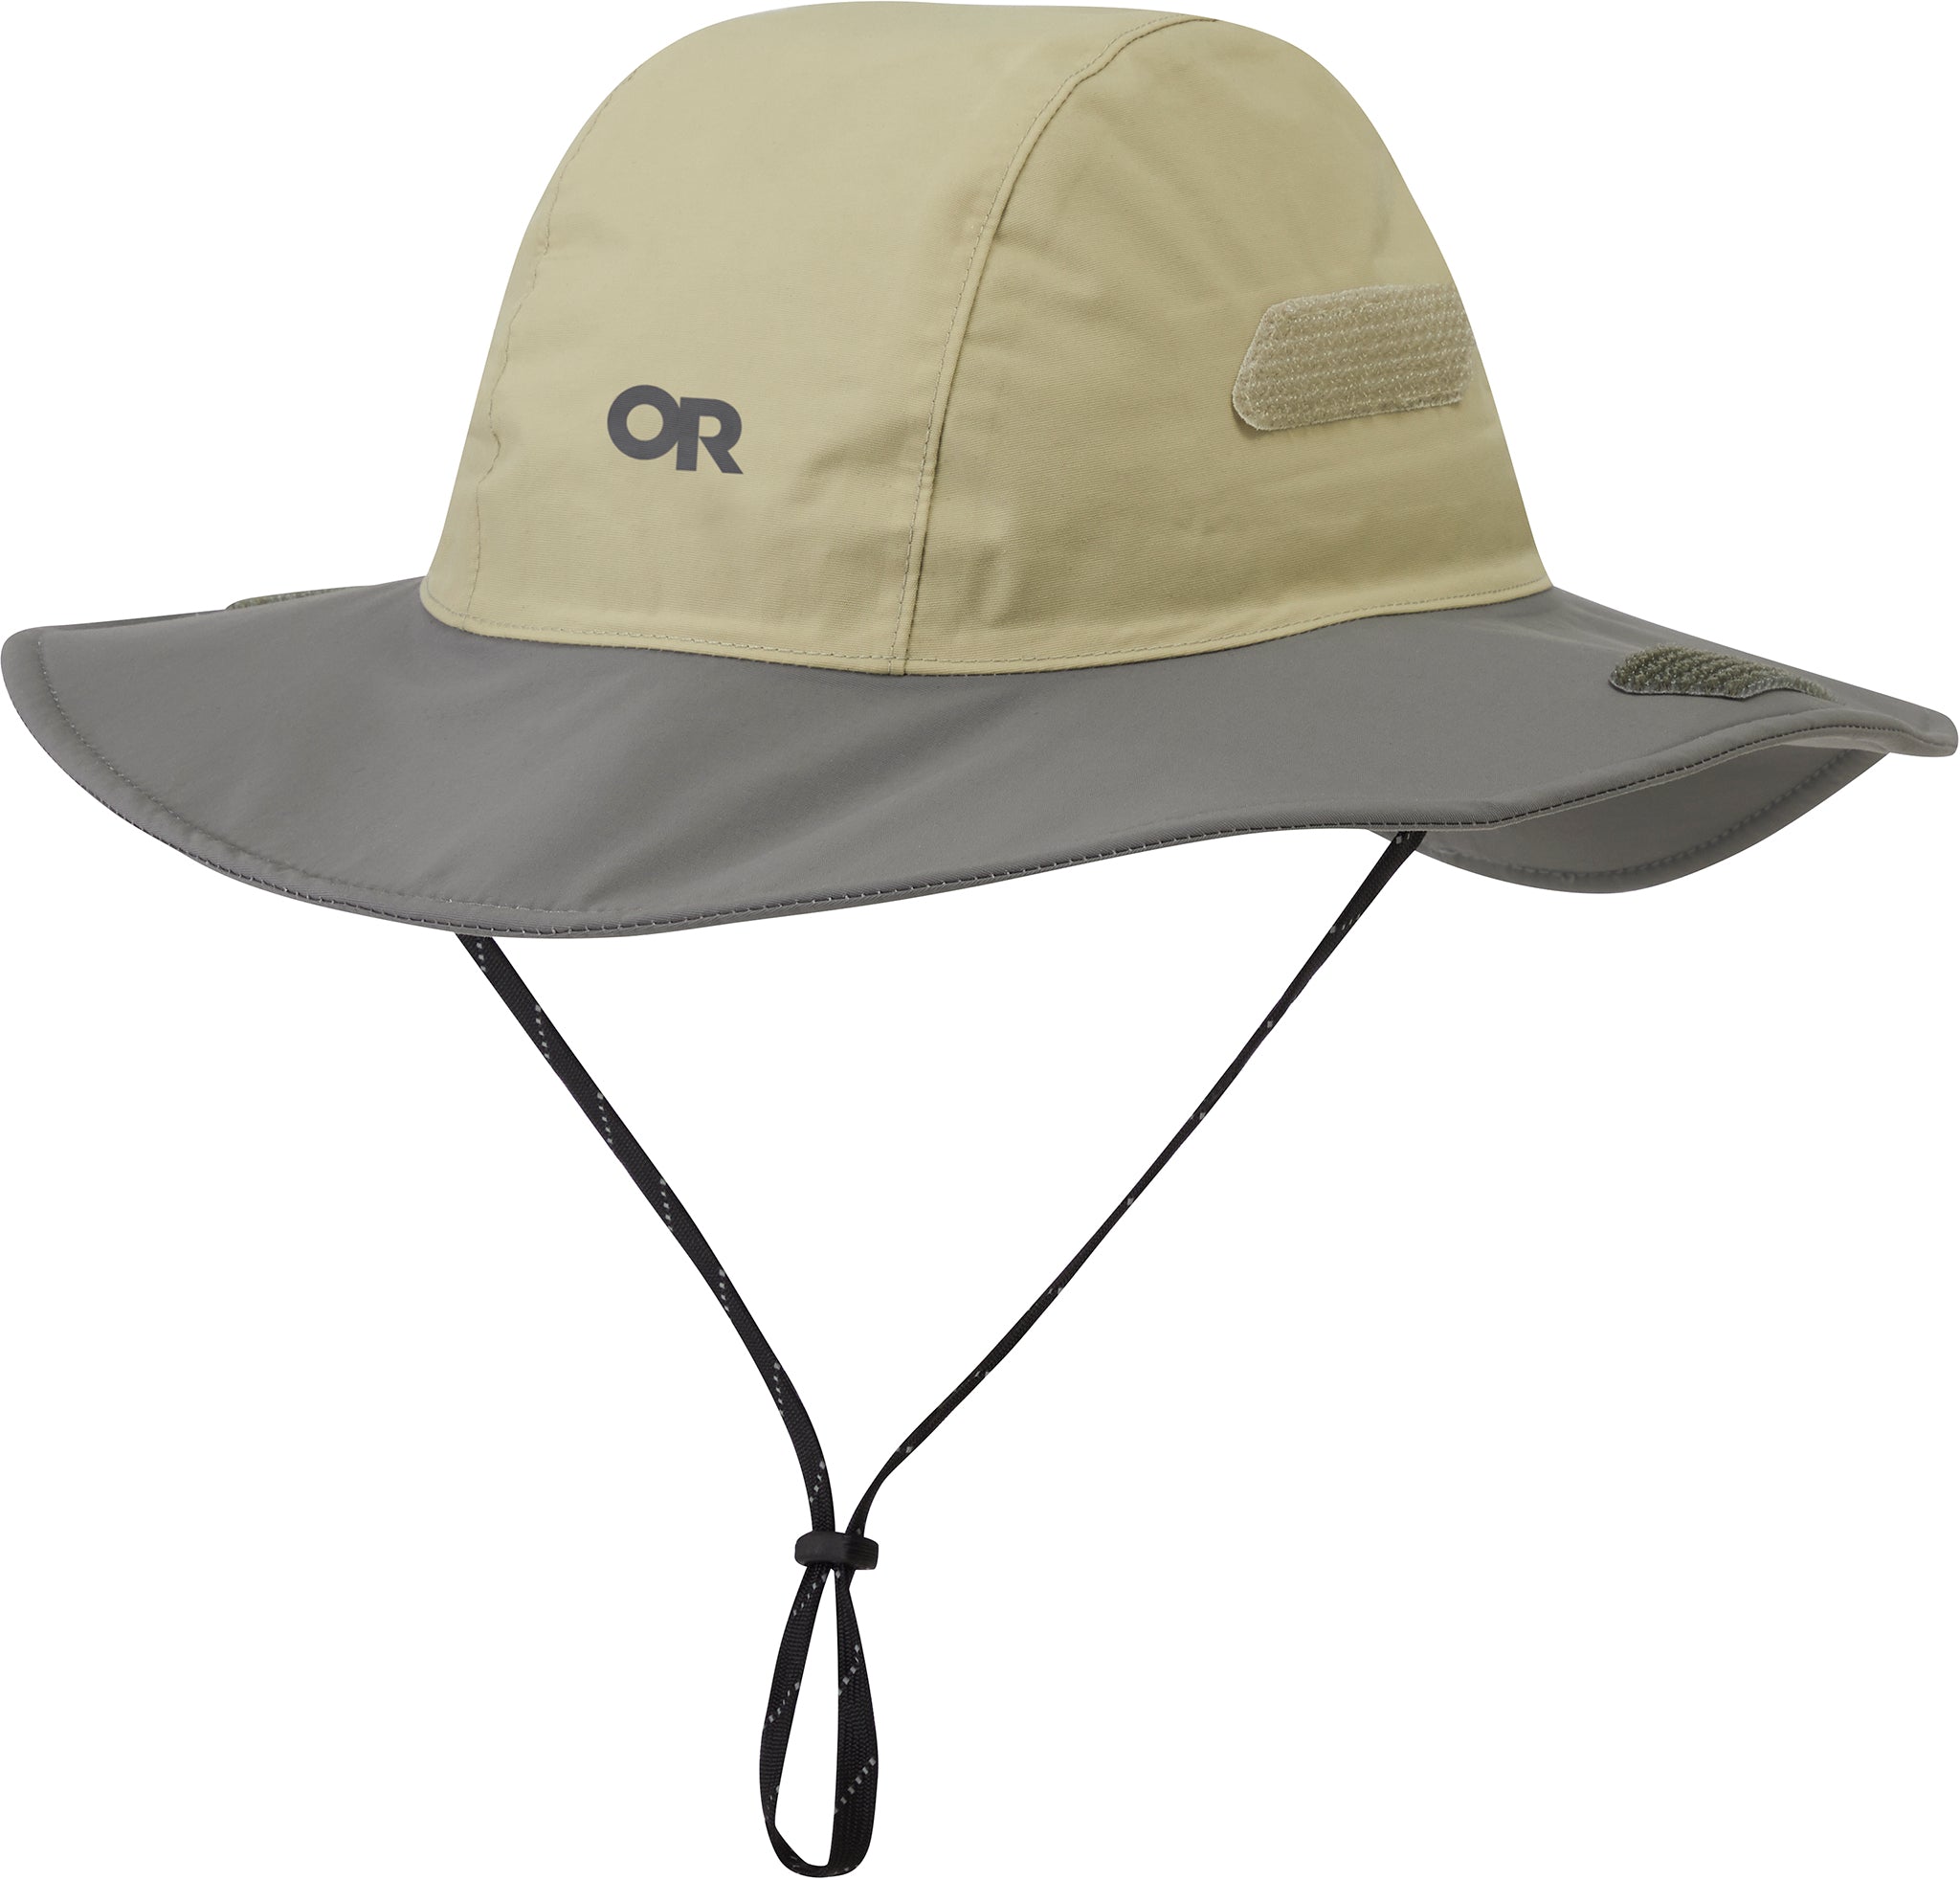 Outdoor Research Seattle Sombrero - Kids | Altitude Sports